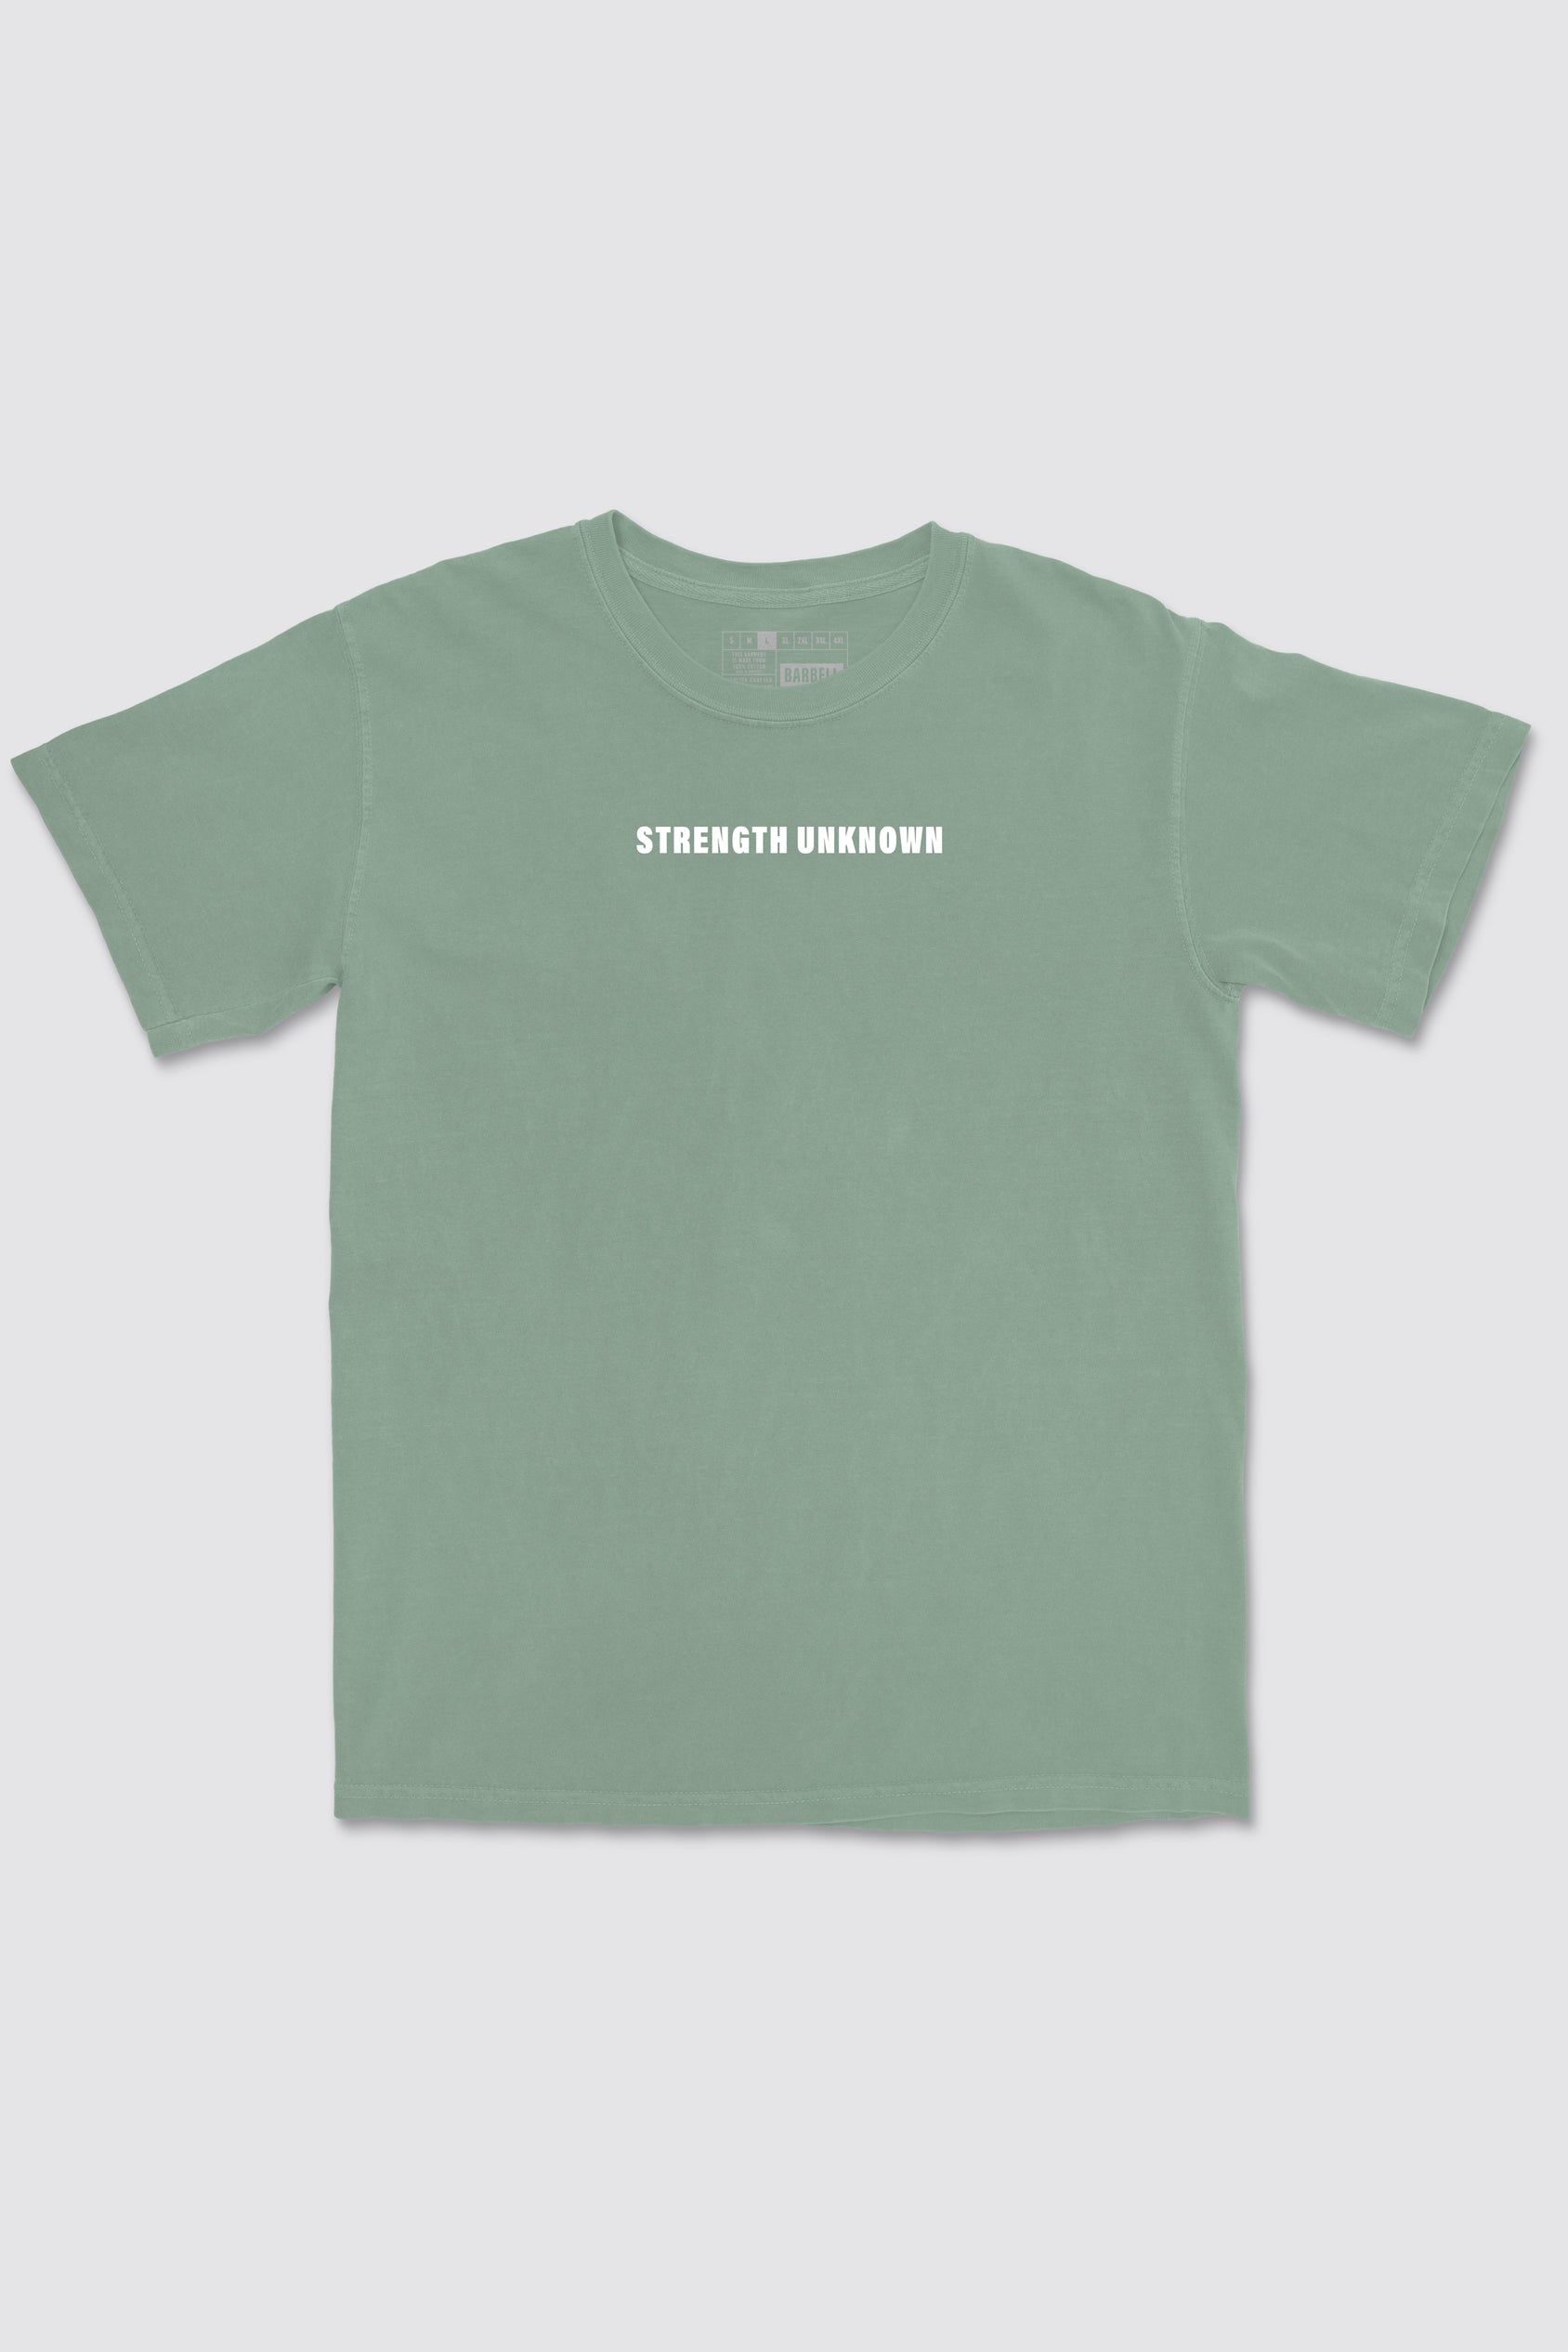 why we made the Strength Unknown Gauntlet Tee